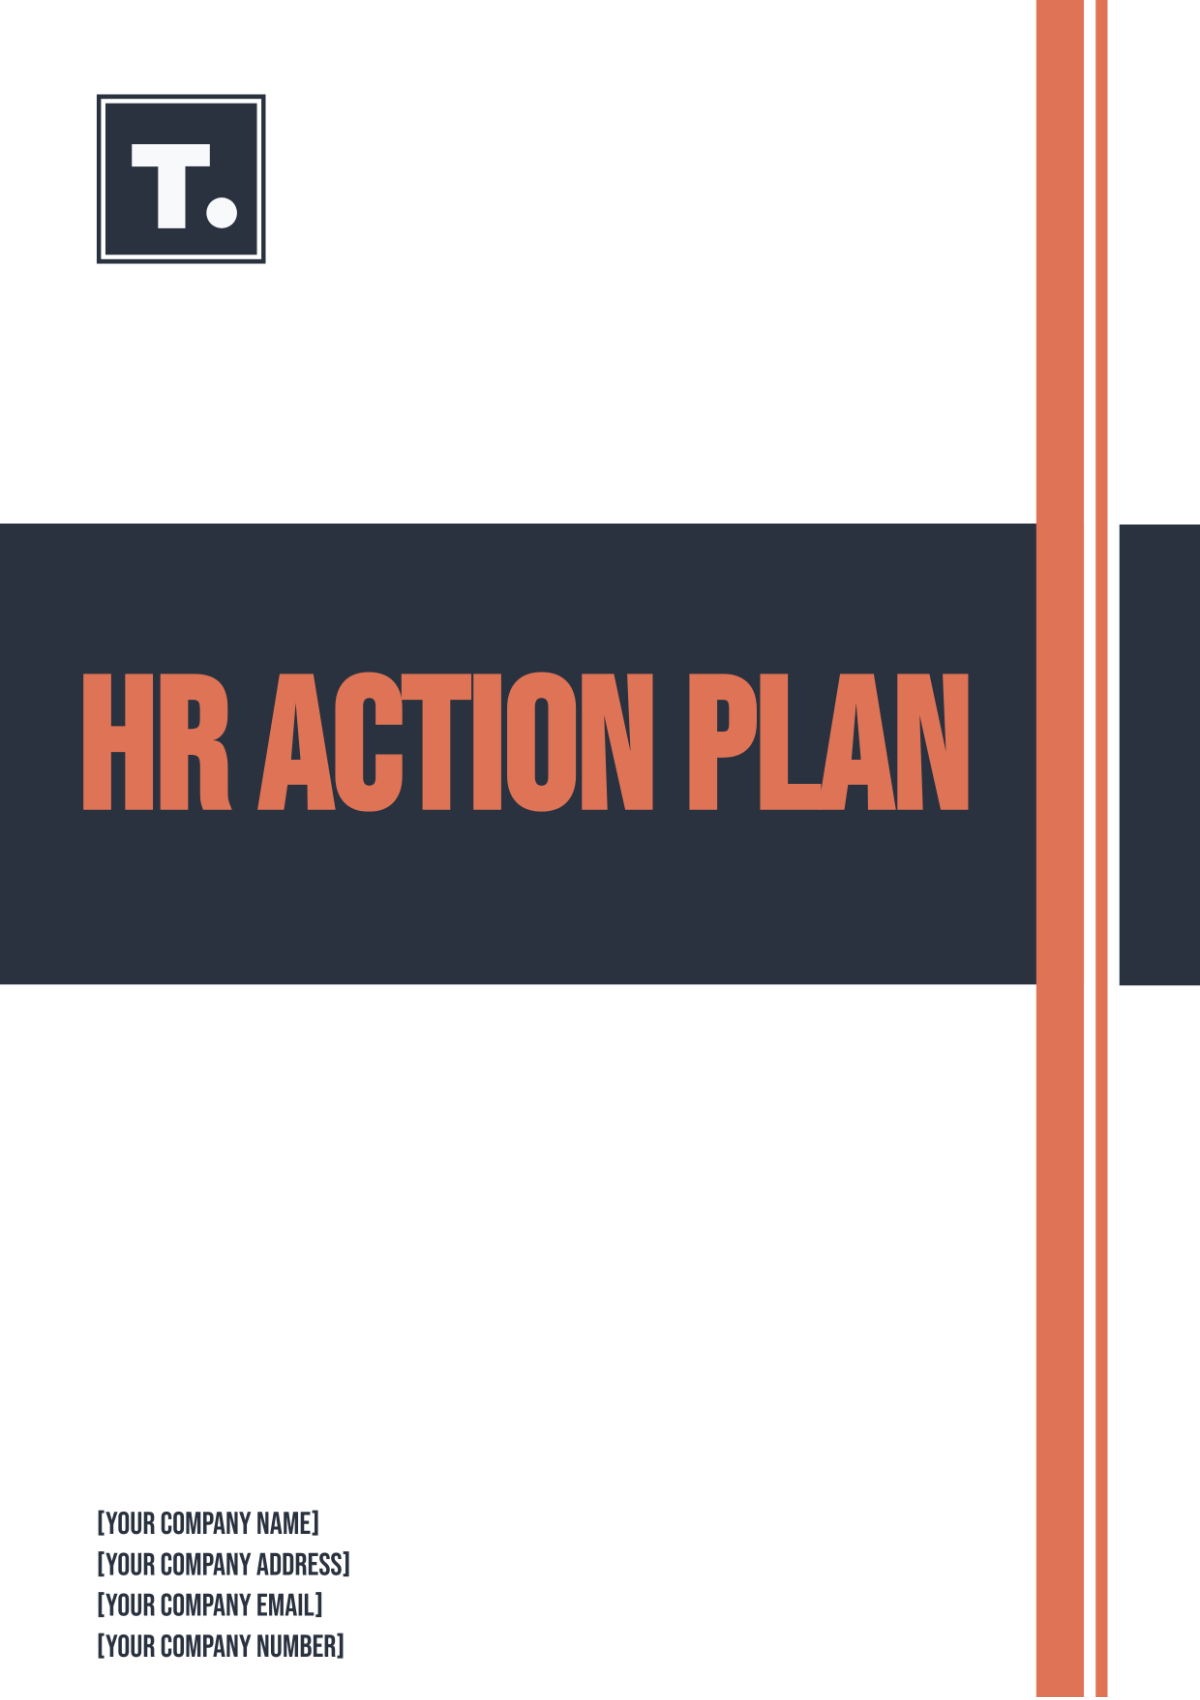 Free HR Action Plan Template